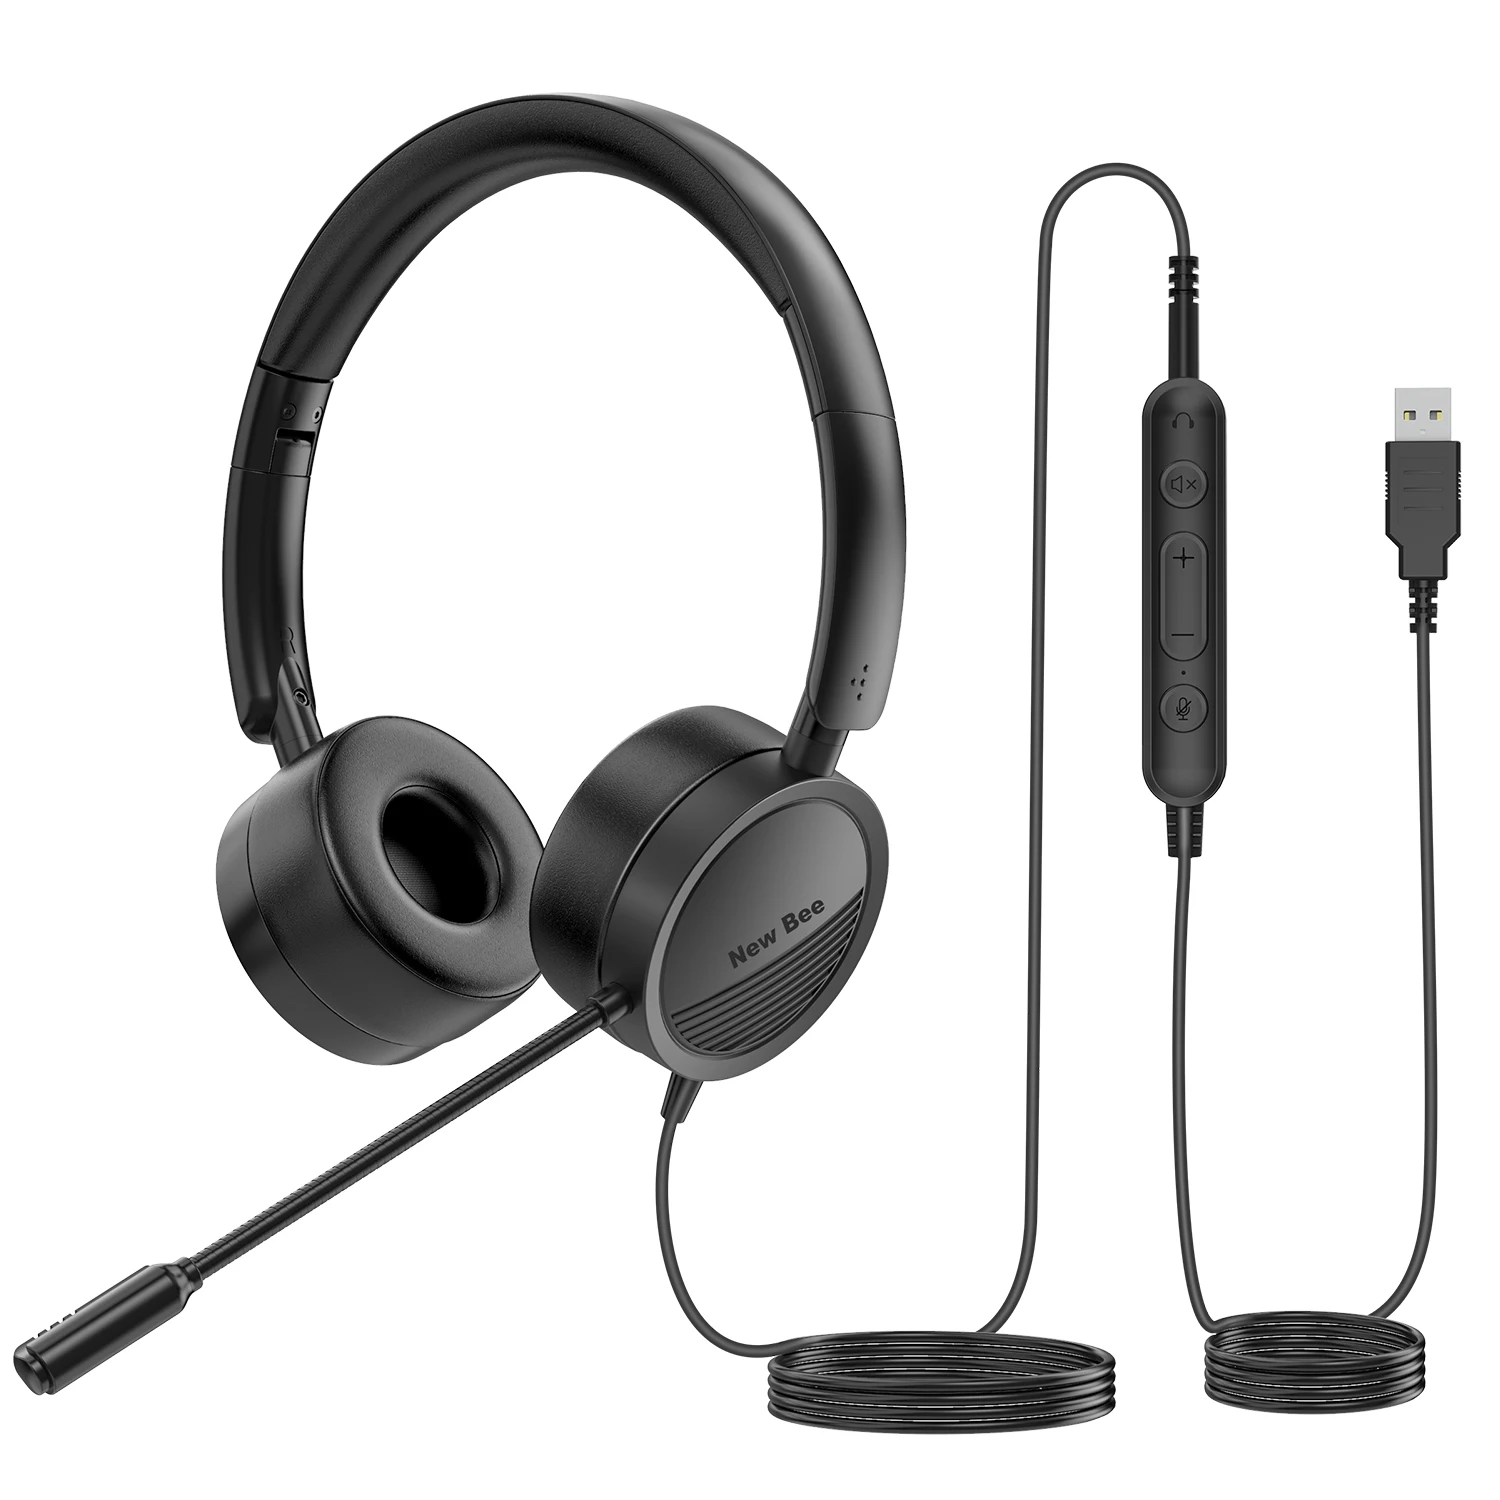 

KINGSTAR 3.5mm USB Wired Headphones with Microphone Business Headset with Mic Mute Noise Cancelling for Call Center Headsets